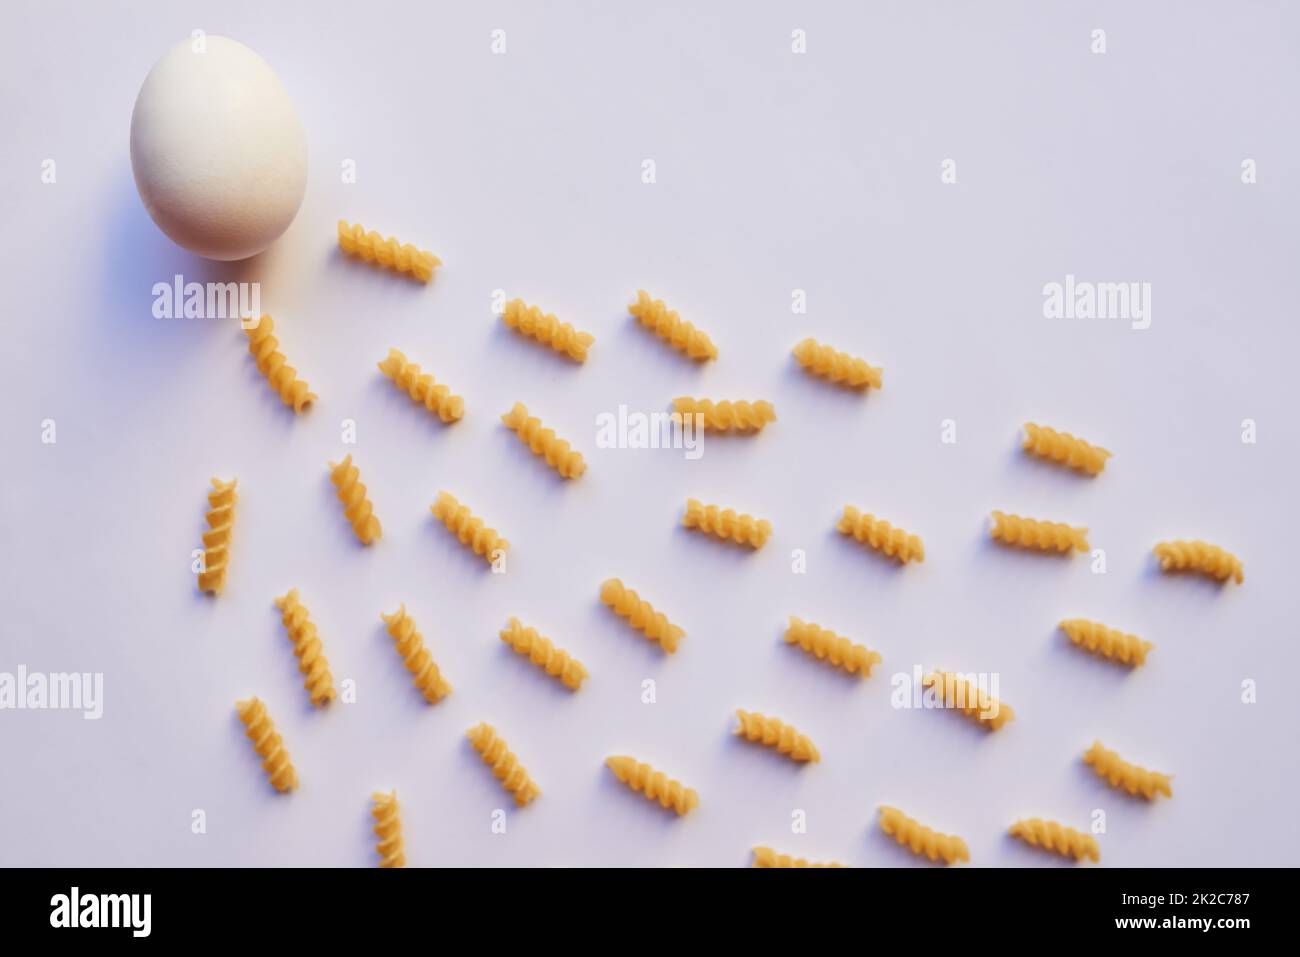 How life gets created. Studio shot of an egg against a grey background while being surrounded by lots of little pieces of pasta. Stock Photo